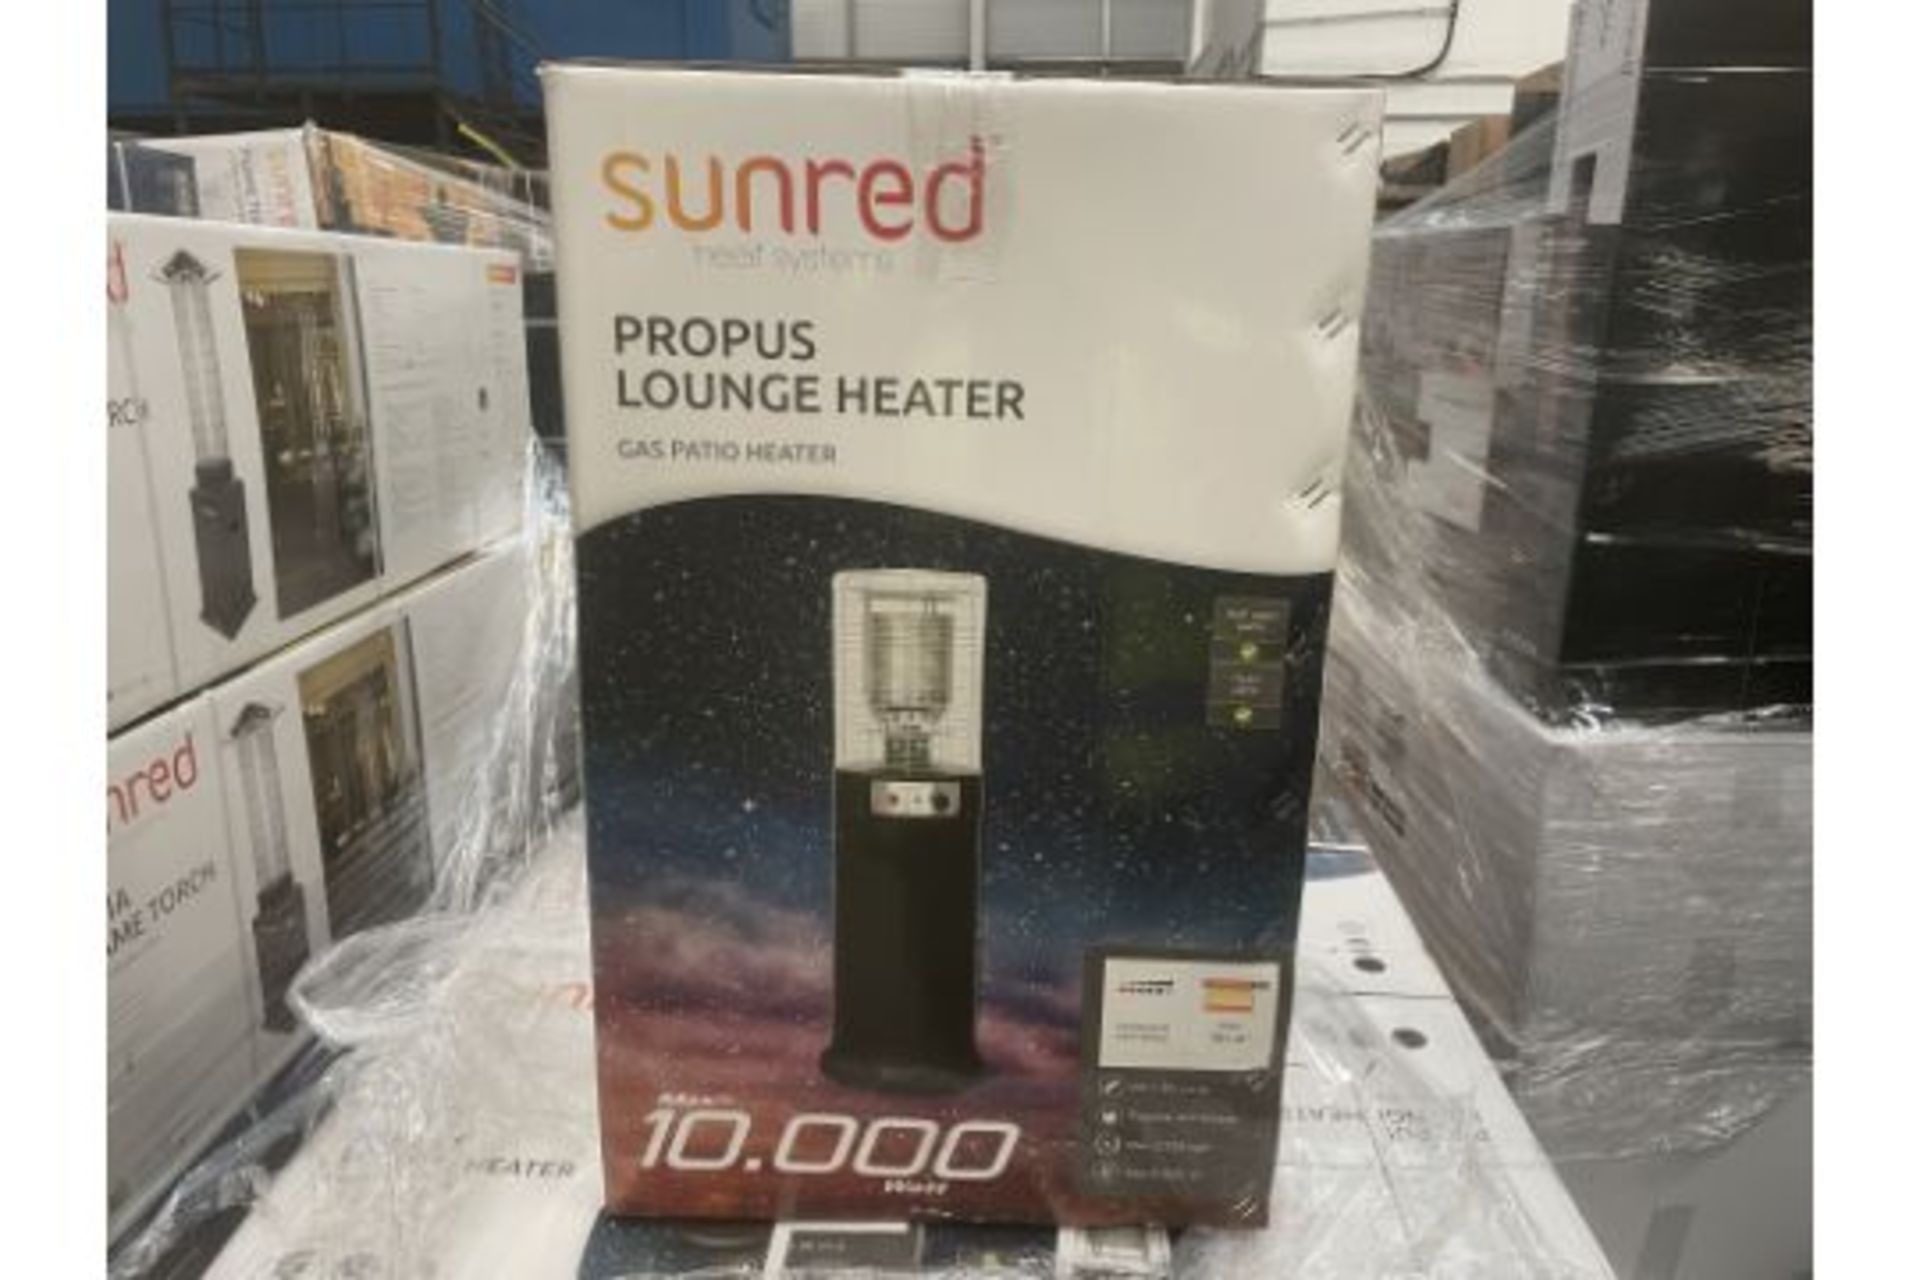 Trade Lot 4 x Brand new Sunred LH15G Propus Lounge Heater – Grey RRP £619 Low height unit (135cm - Image 2 of 4